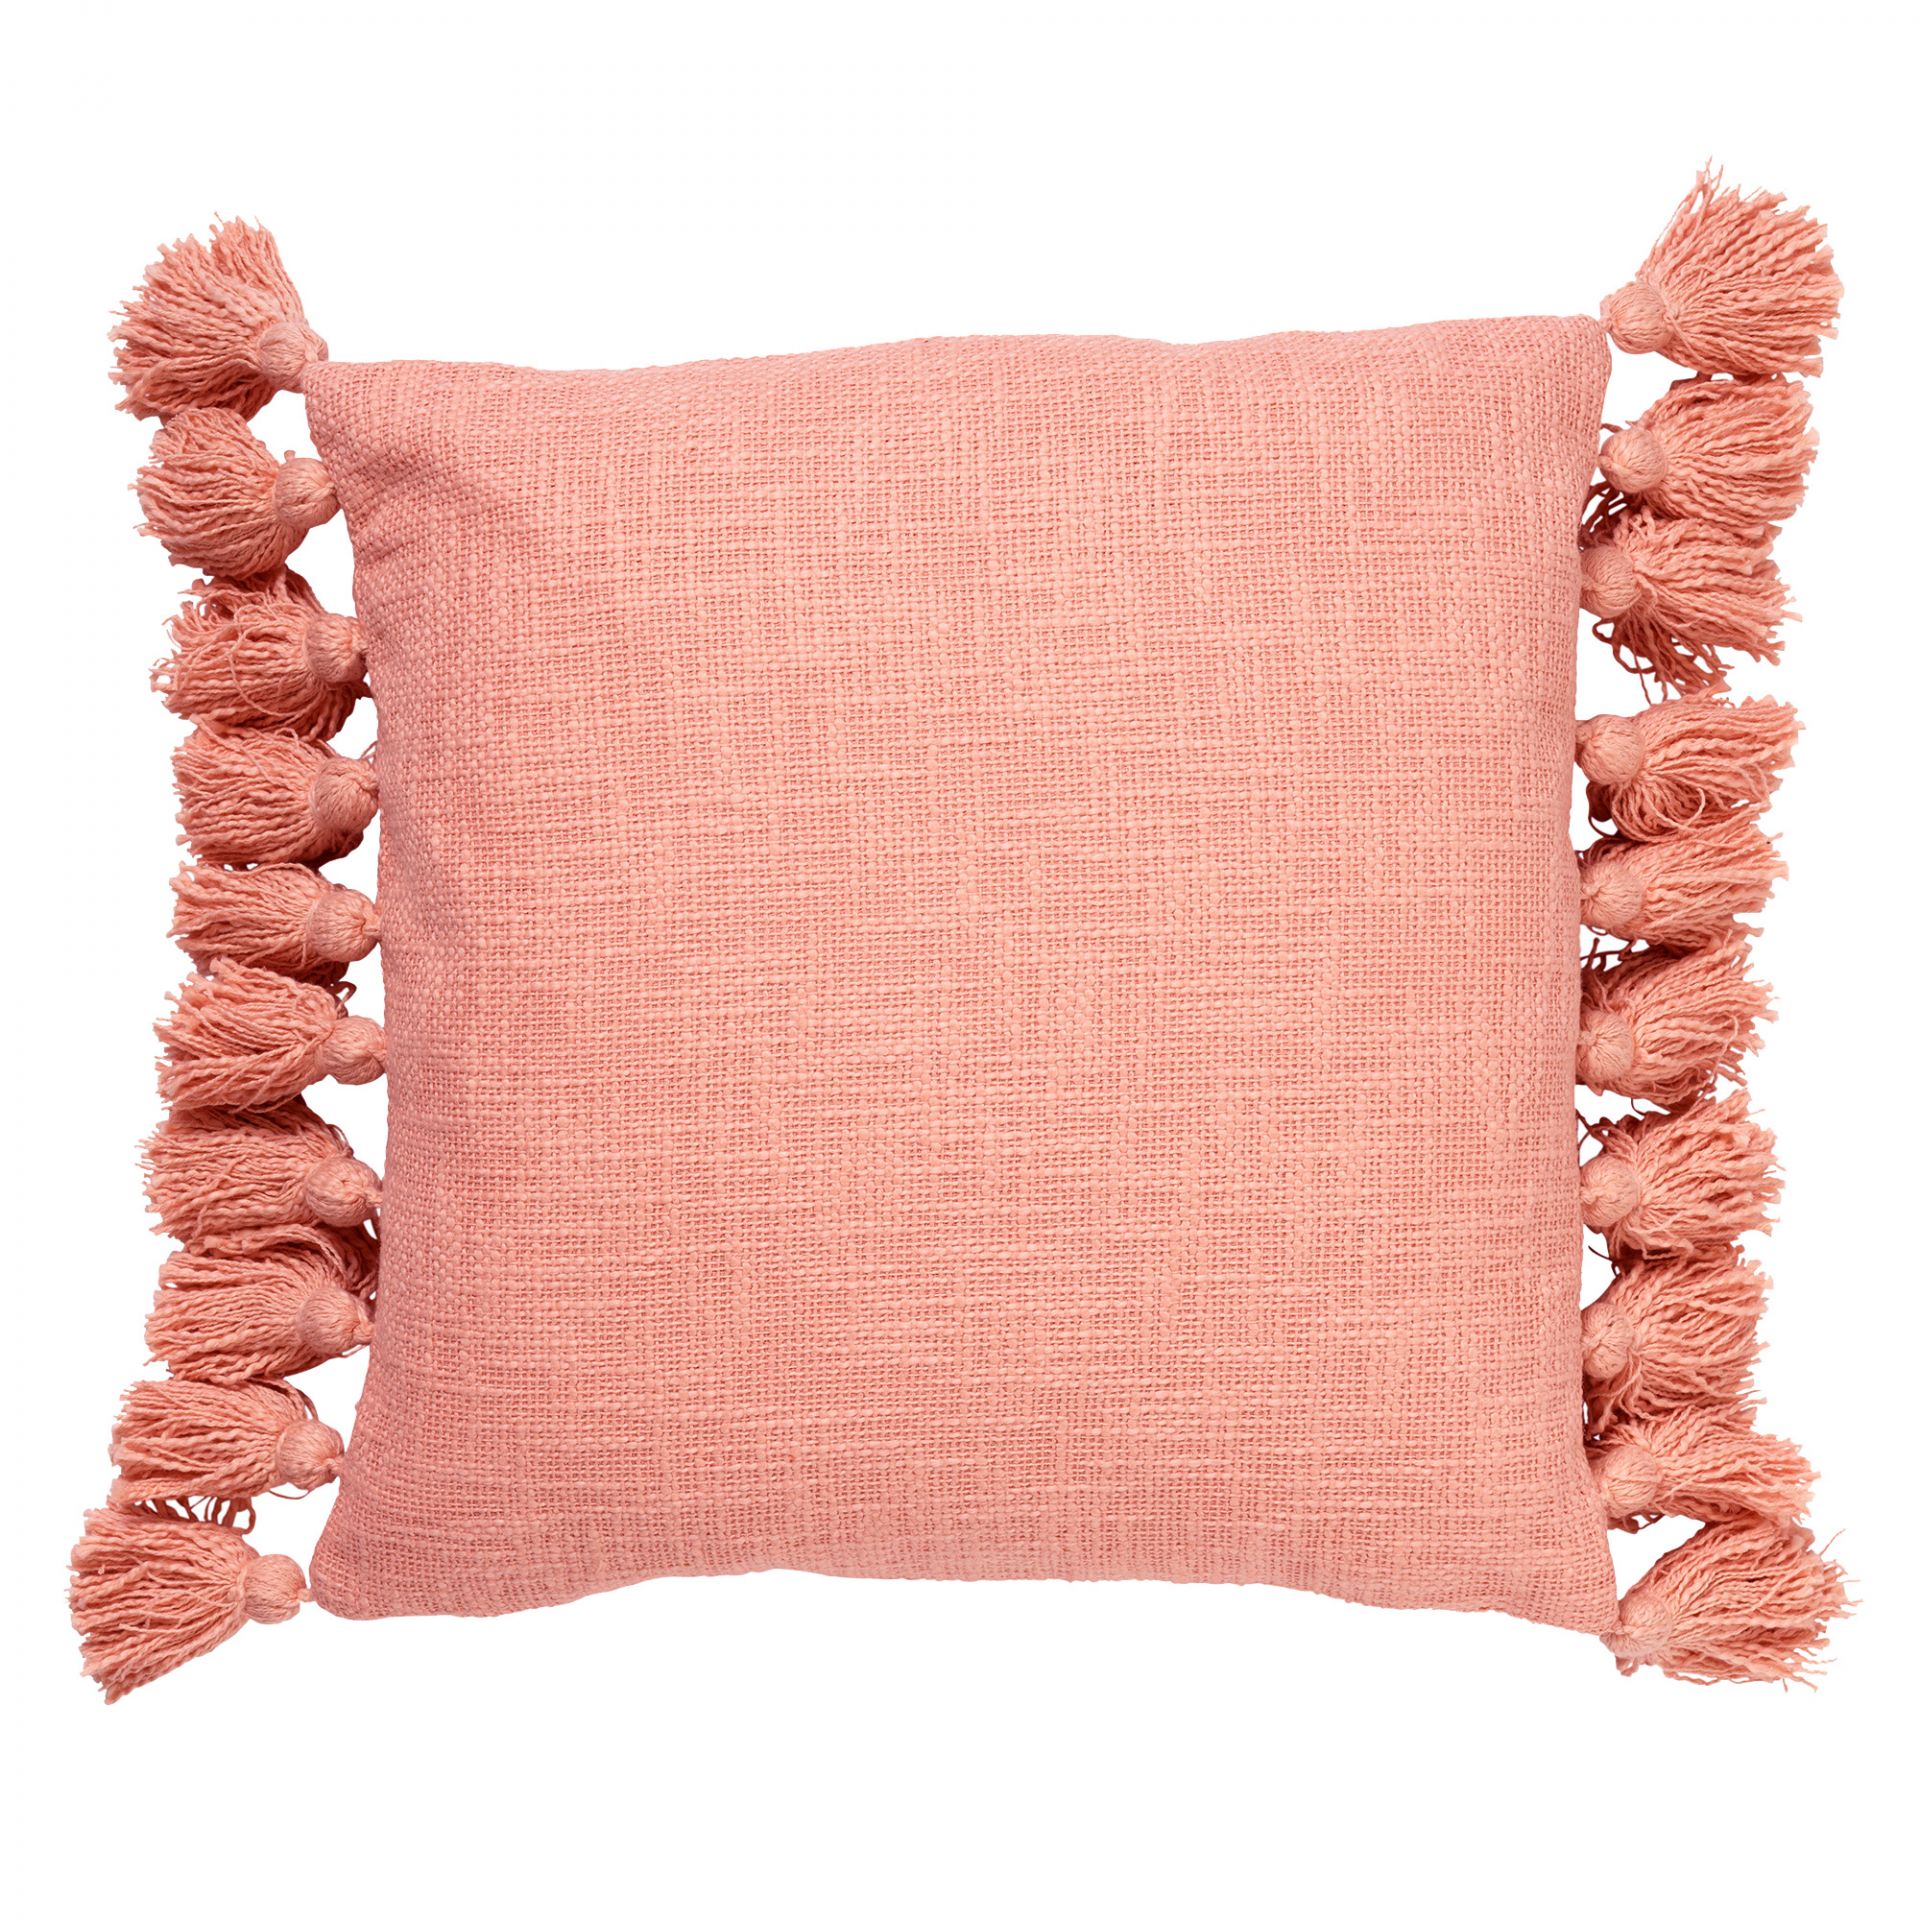 RUBY - Cushion cotton 45x45 cm Muted Clay - pink